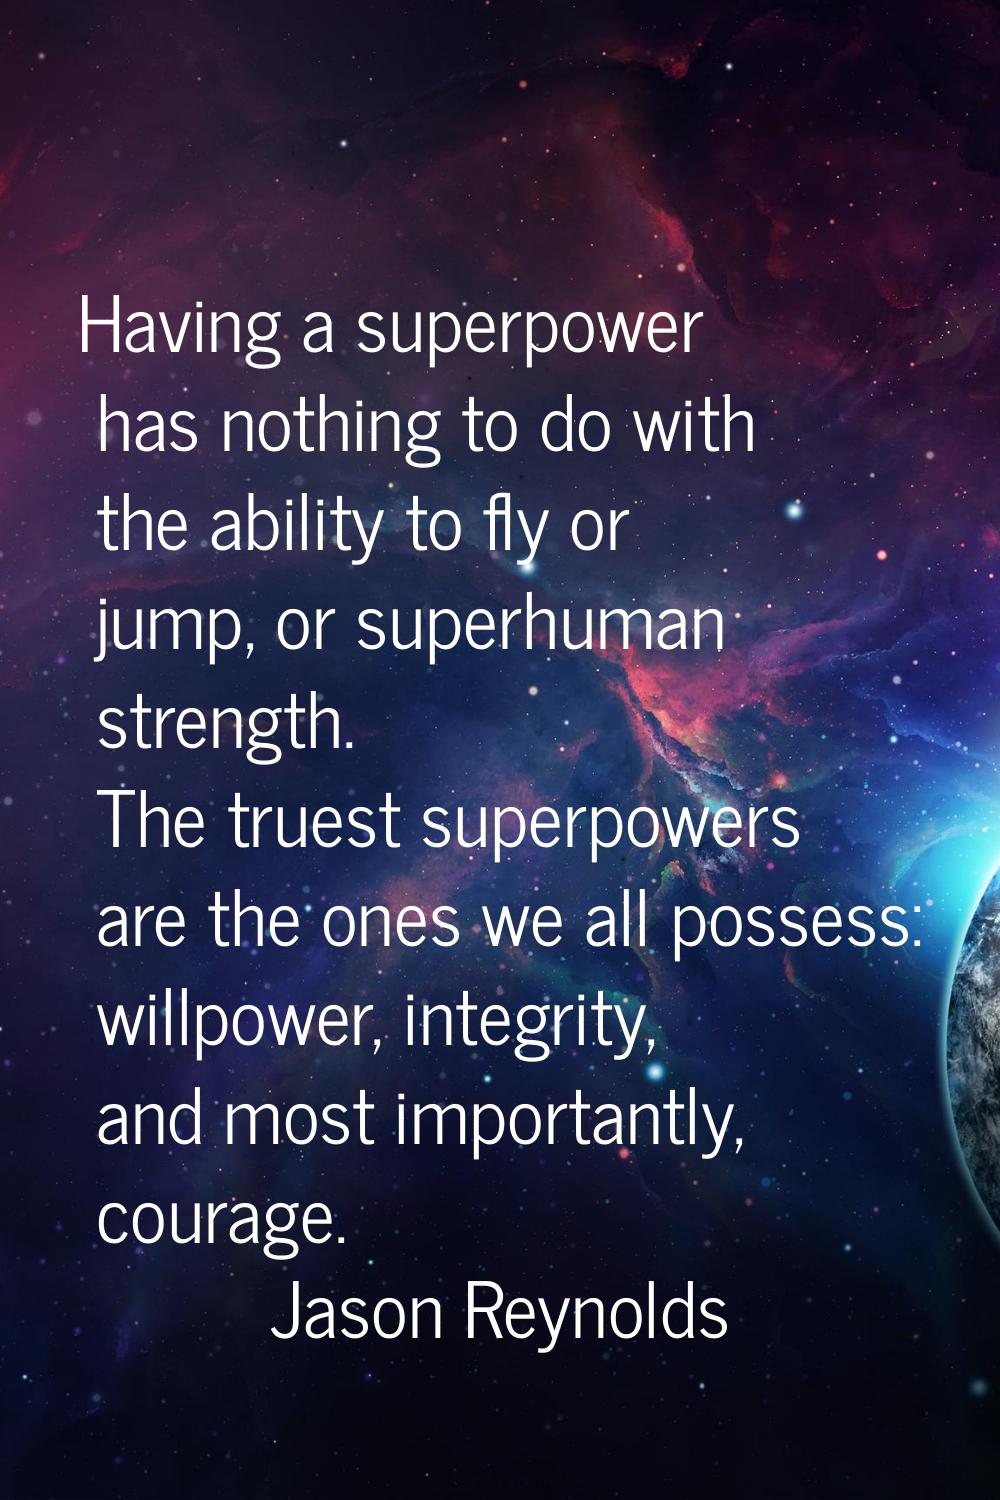 Having a superpower has nothing to do with the ability to fly or jump, or superhuman strength. The 